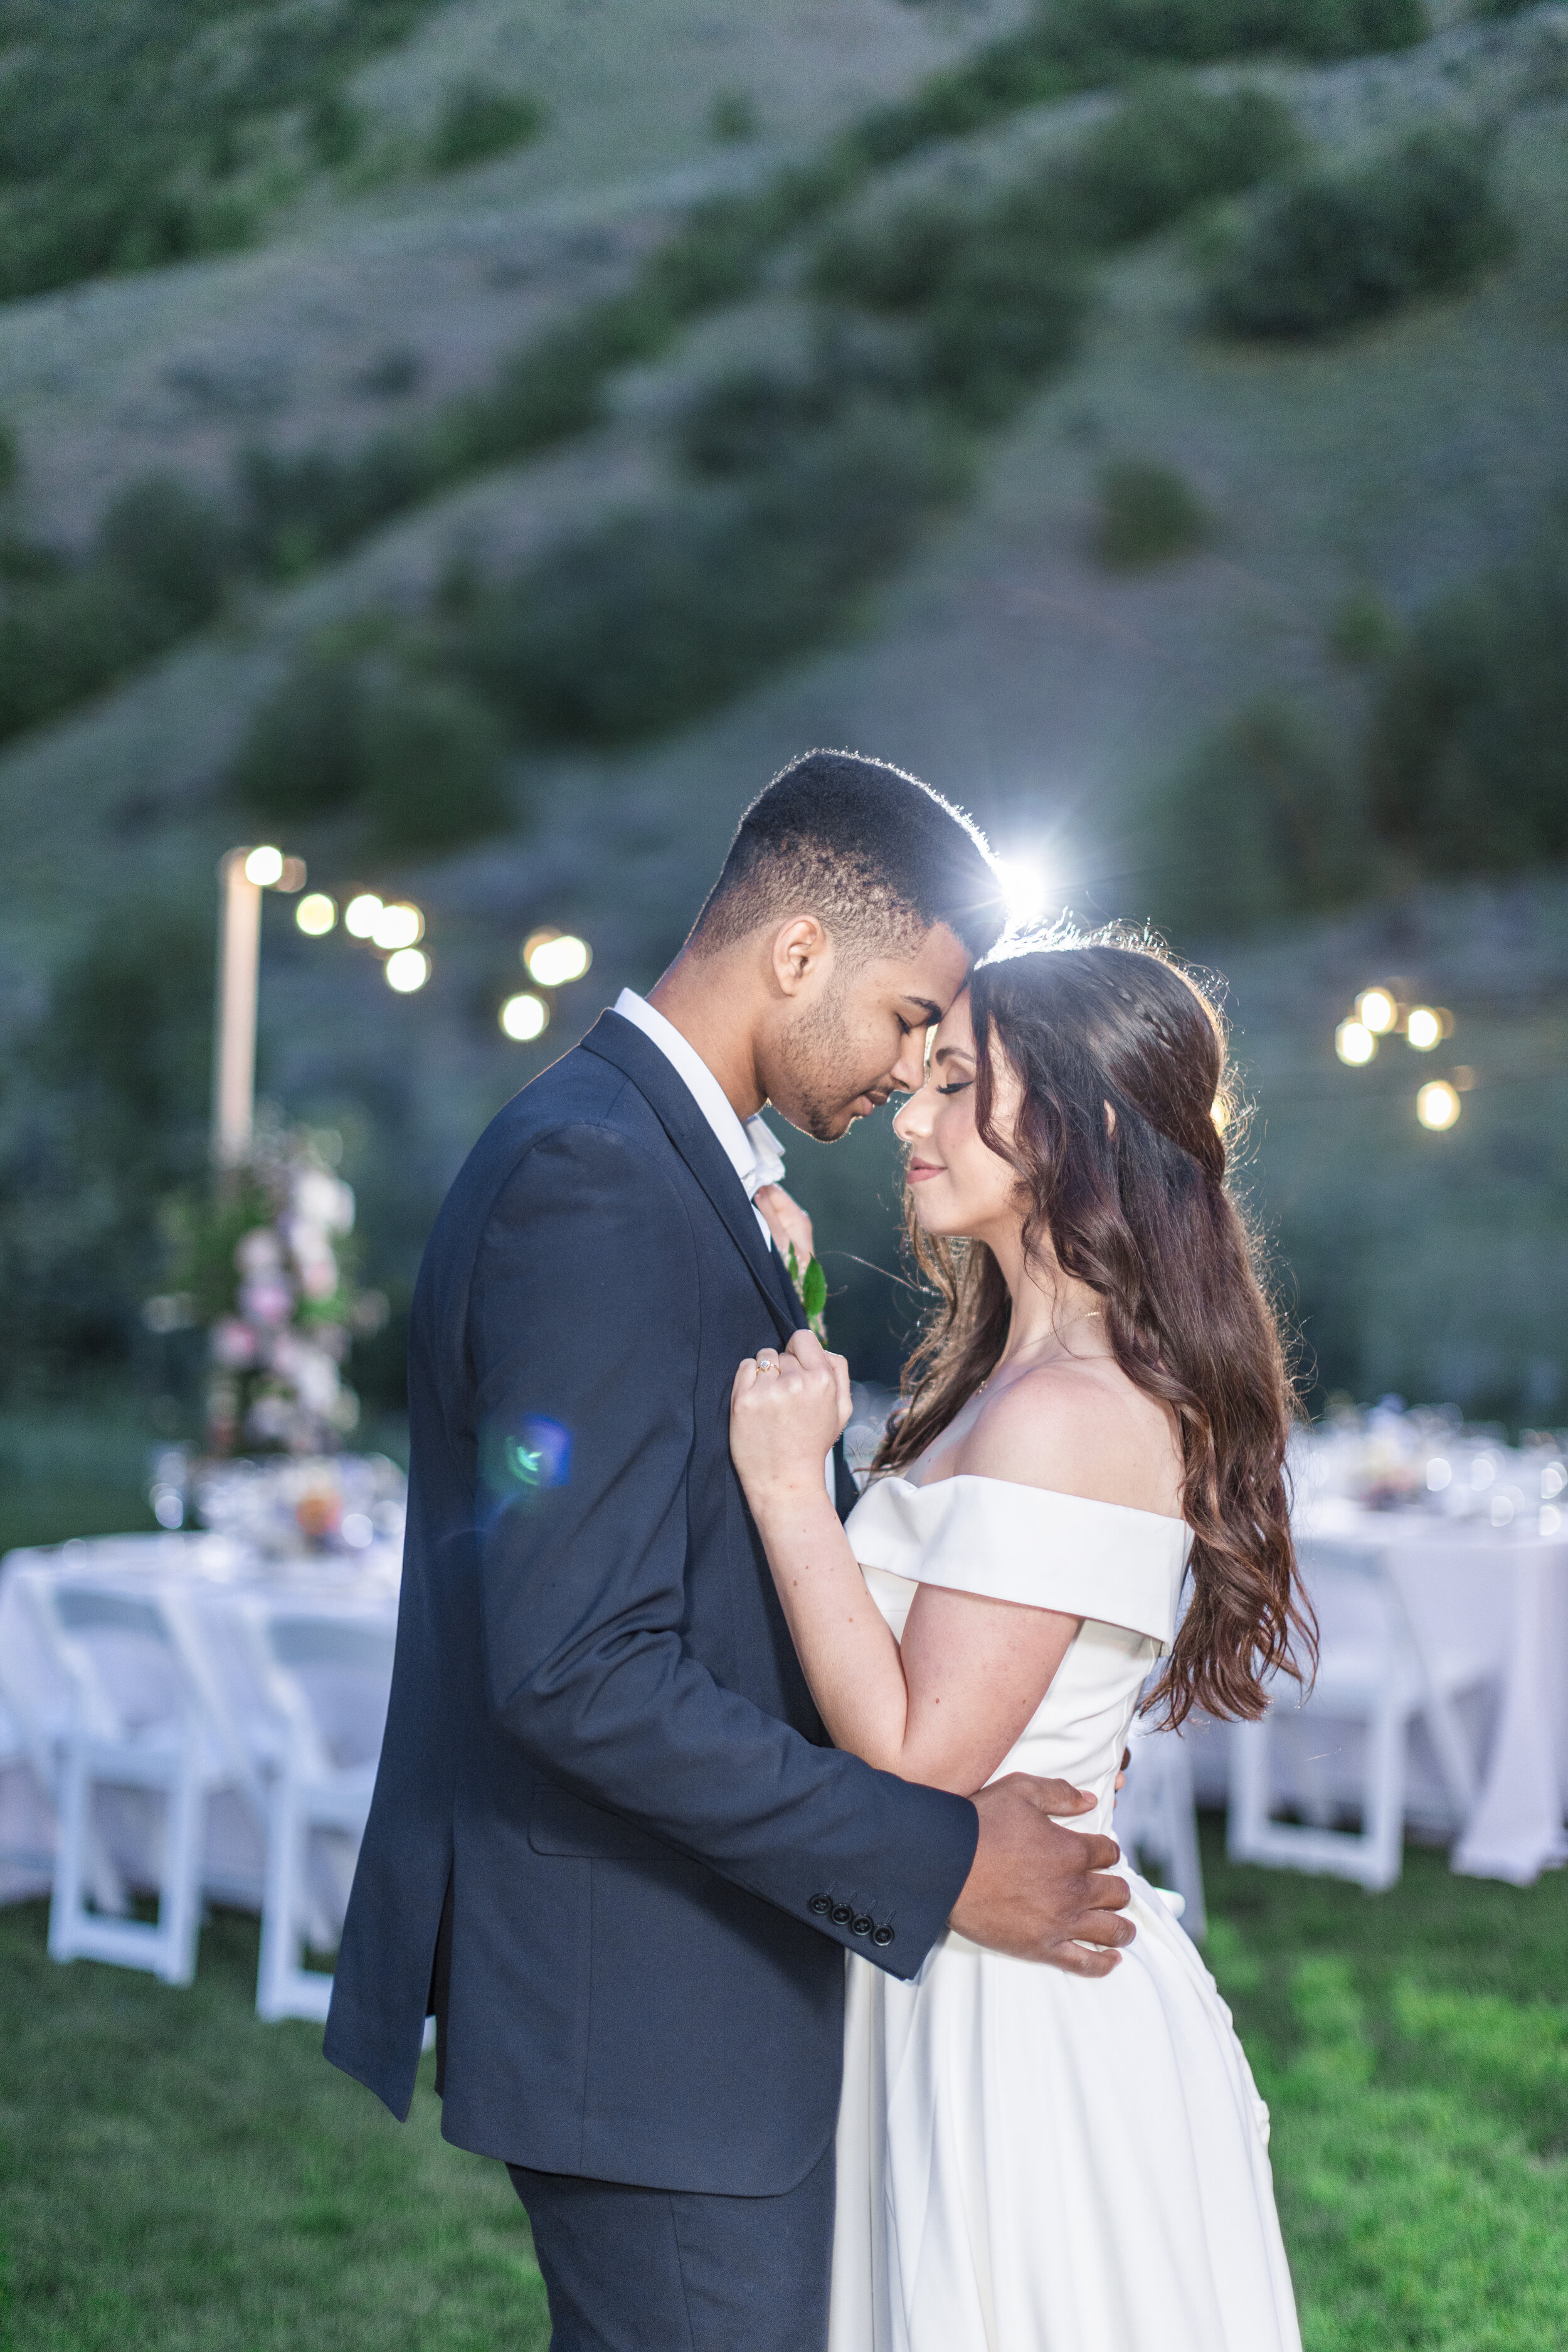  Wedding day workshop photo of bride and groom snuggling together under the setting sun by Clarity Lane Photography a professional Utah wedding photographer. learn photography photography workshops #claritylanephotography #claritylaneweddings #clarit